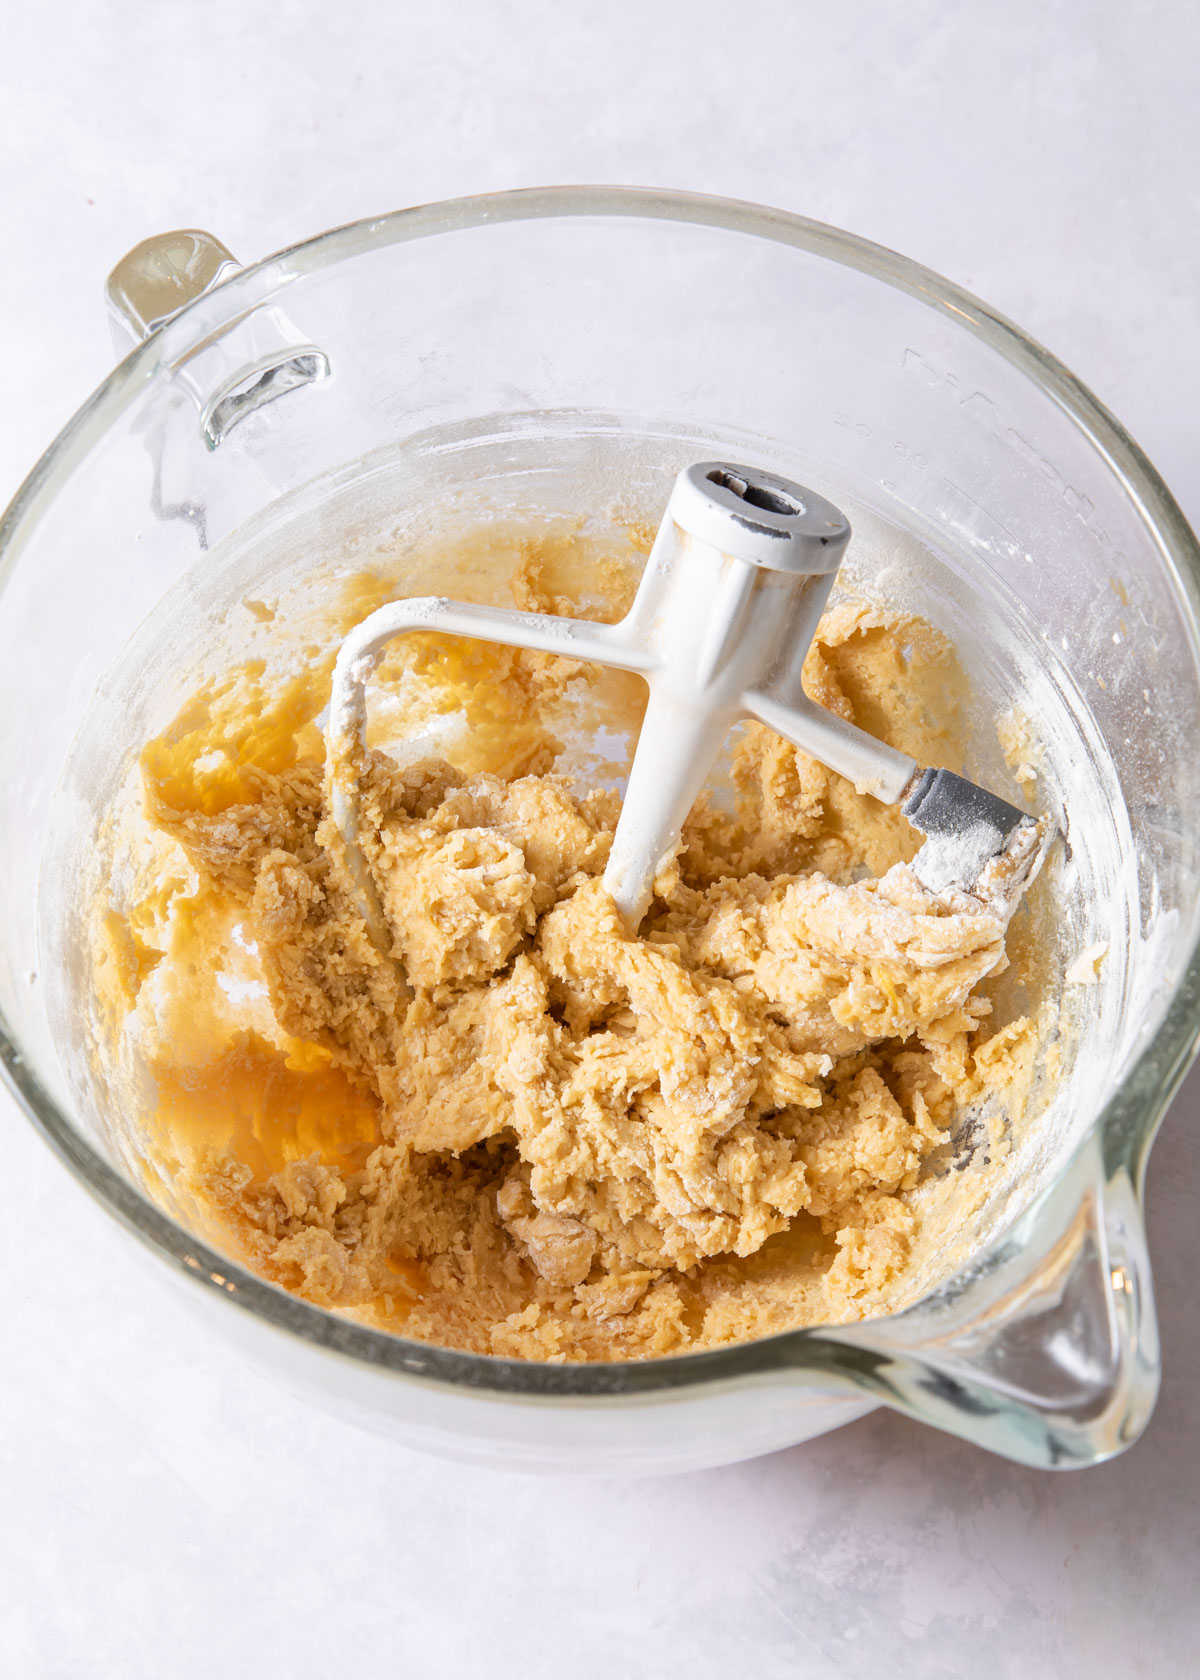 Coffee cake batter being mixed